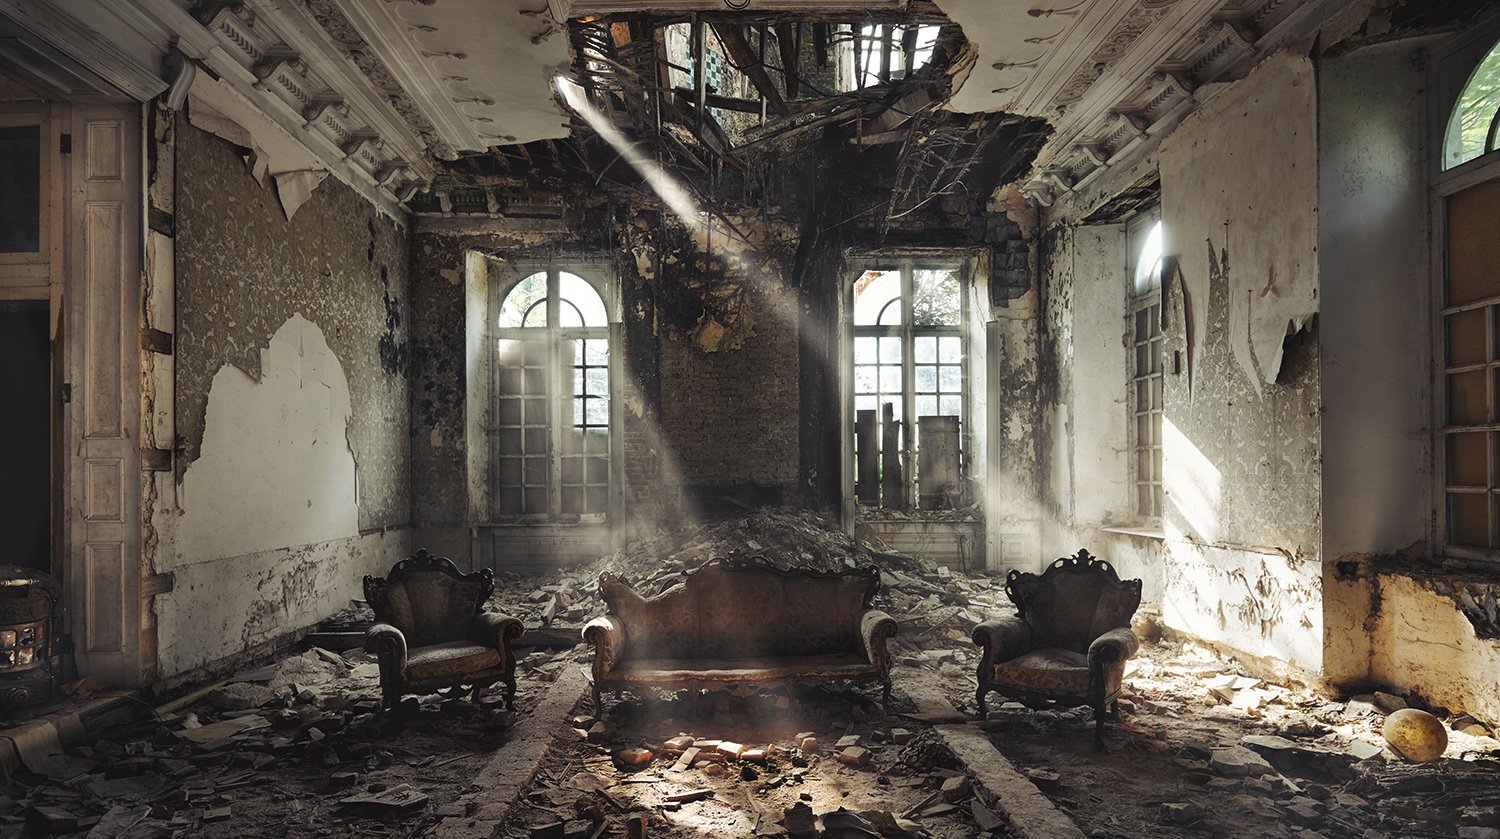  photographer spent years capturing beauty decaying buildings 